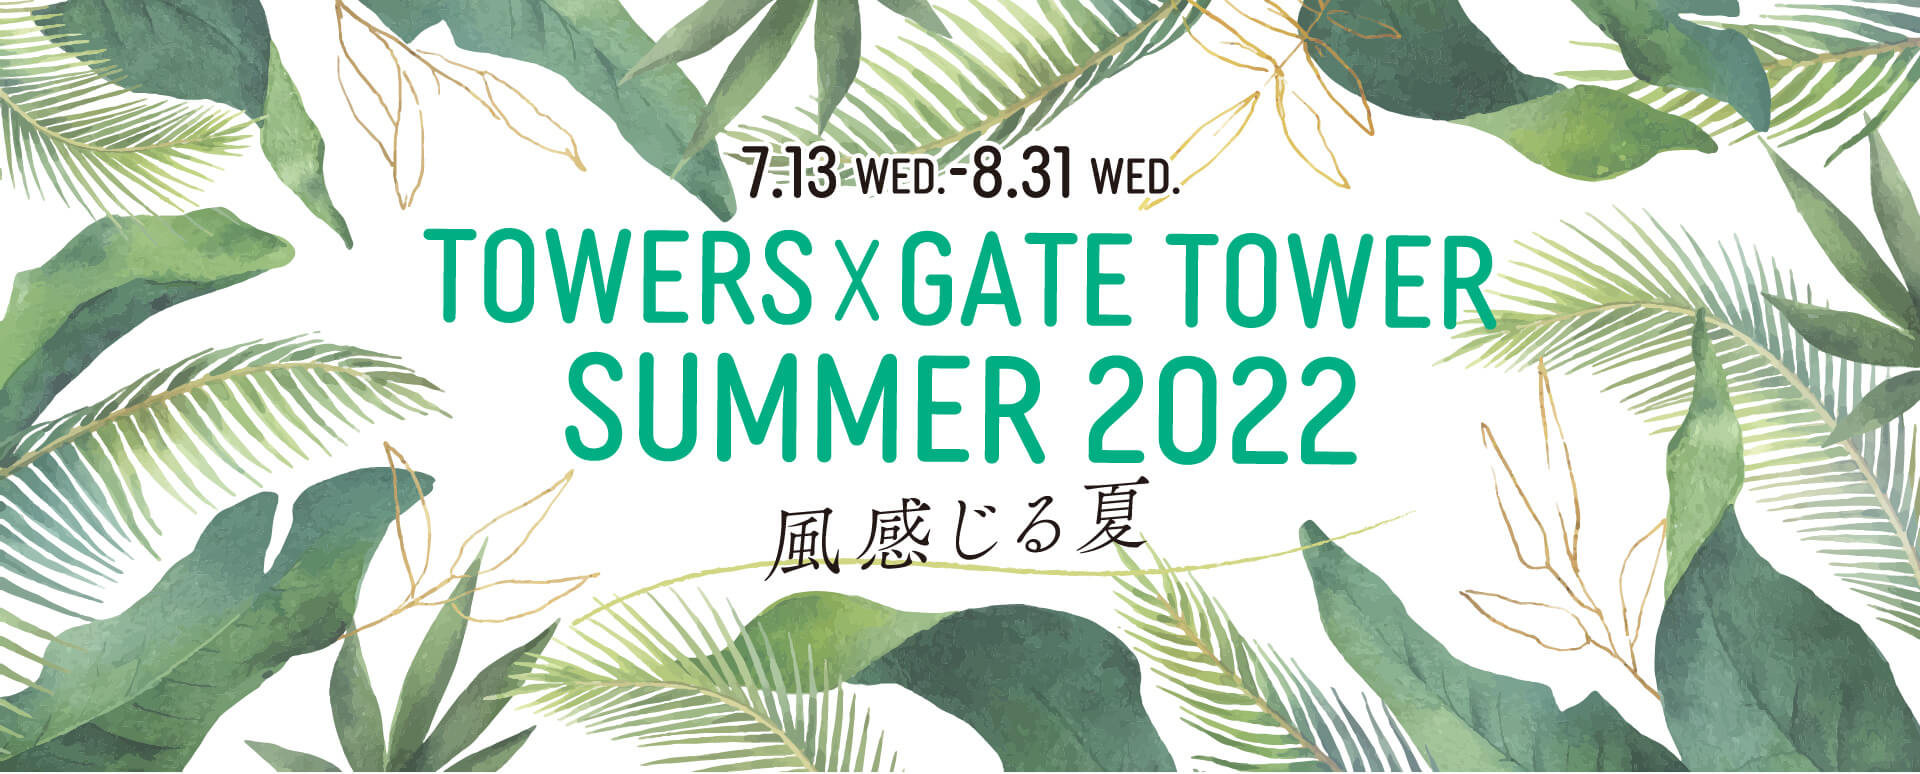 7.13 wed.-8.31 WED. Towers  Gate tower SUmMer 2022 風感じる夏